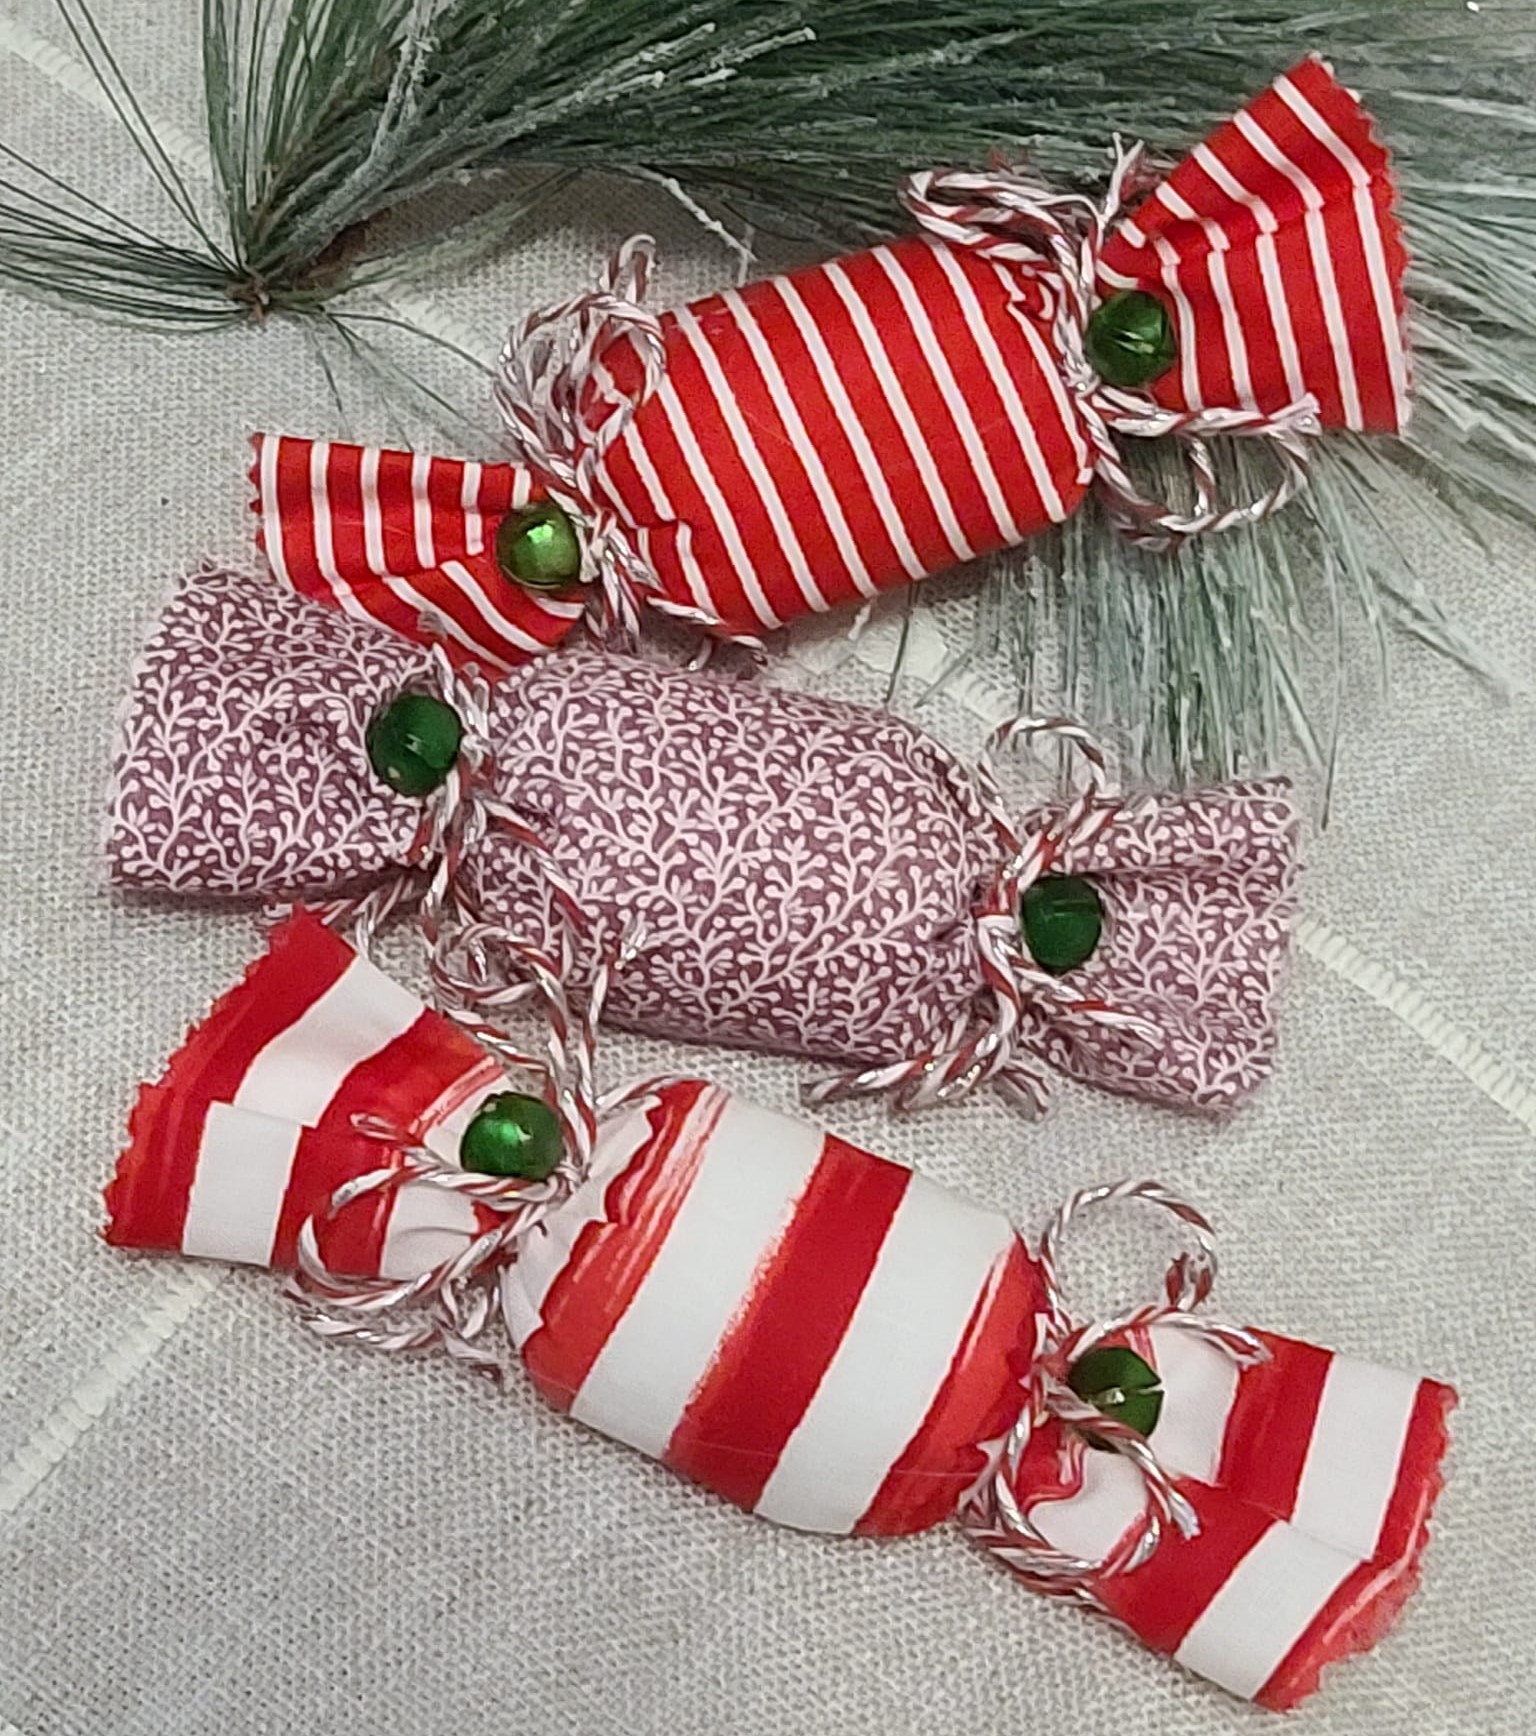 Bowl filler candy ornaments set of 3 Christmas red and white